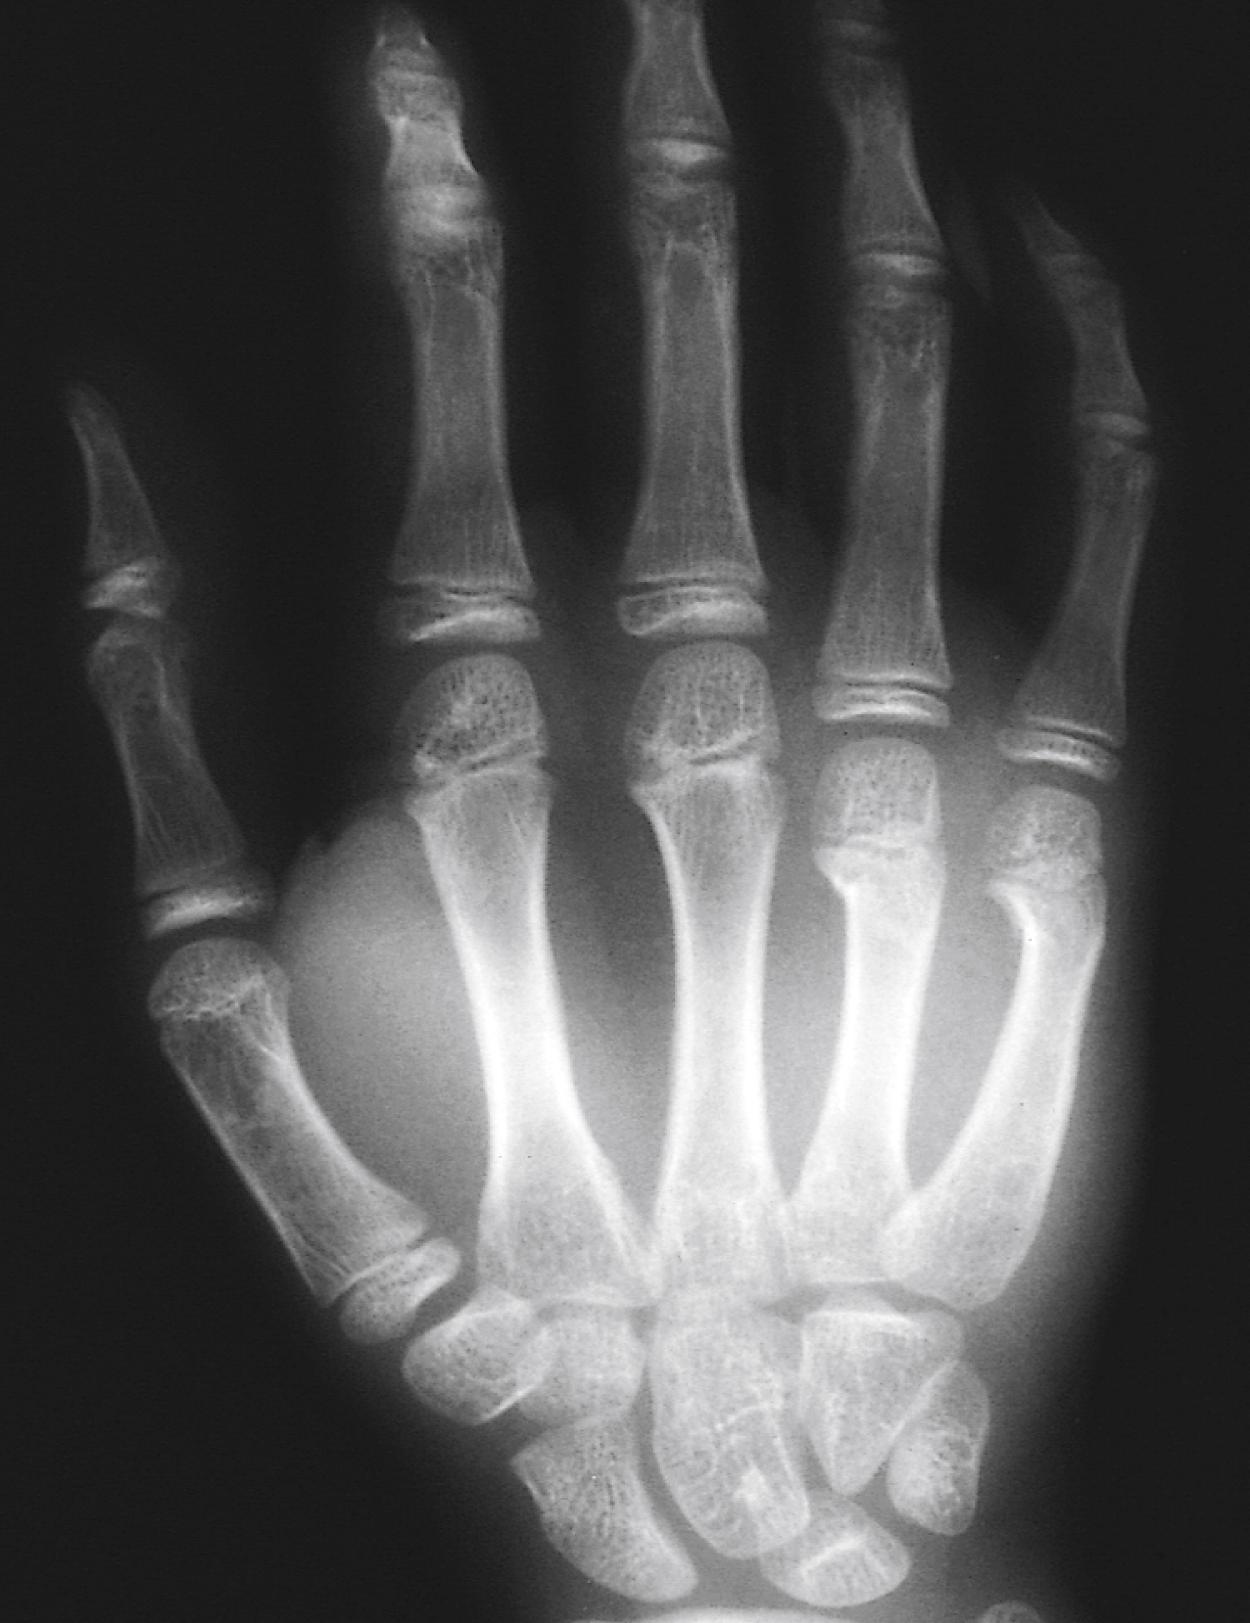 Fig. 22.51, Boxer’s fracture. This adolescent presented with pain and swelling of the lateral aspect of his right hand after punching a wall in a fit of temper. Radiographically he has typical boxer’s fractures of the necks of the fourth and fifth metacarpals with volar displacement of the distal fragments.